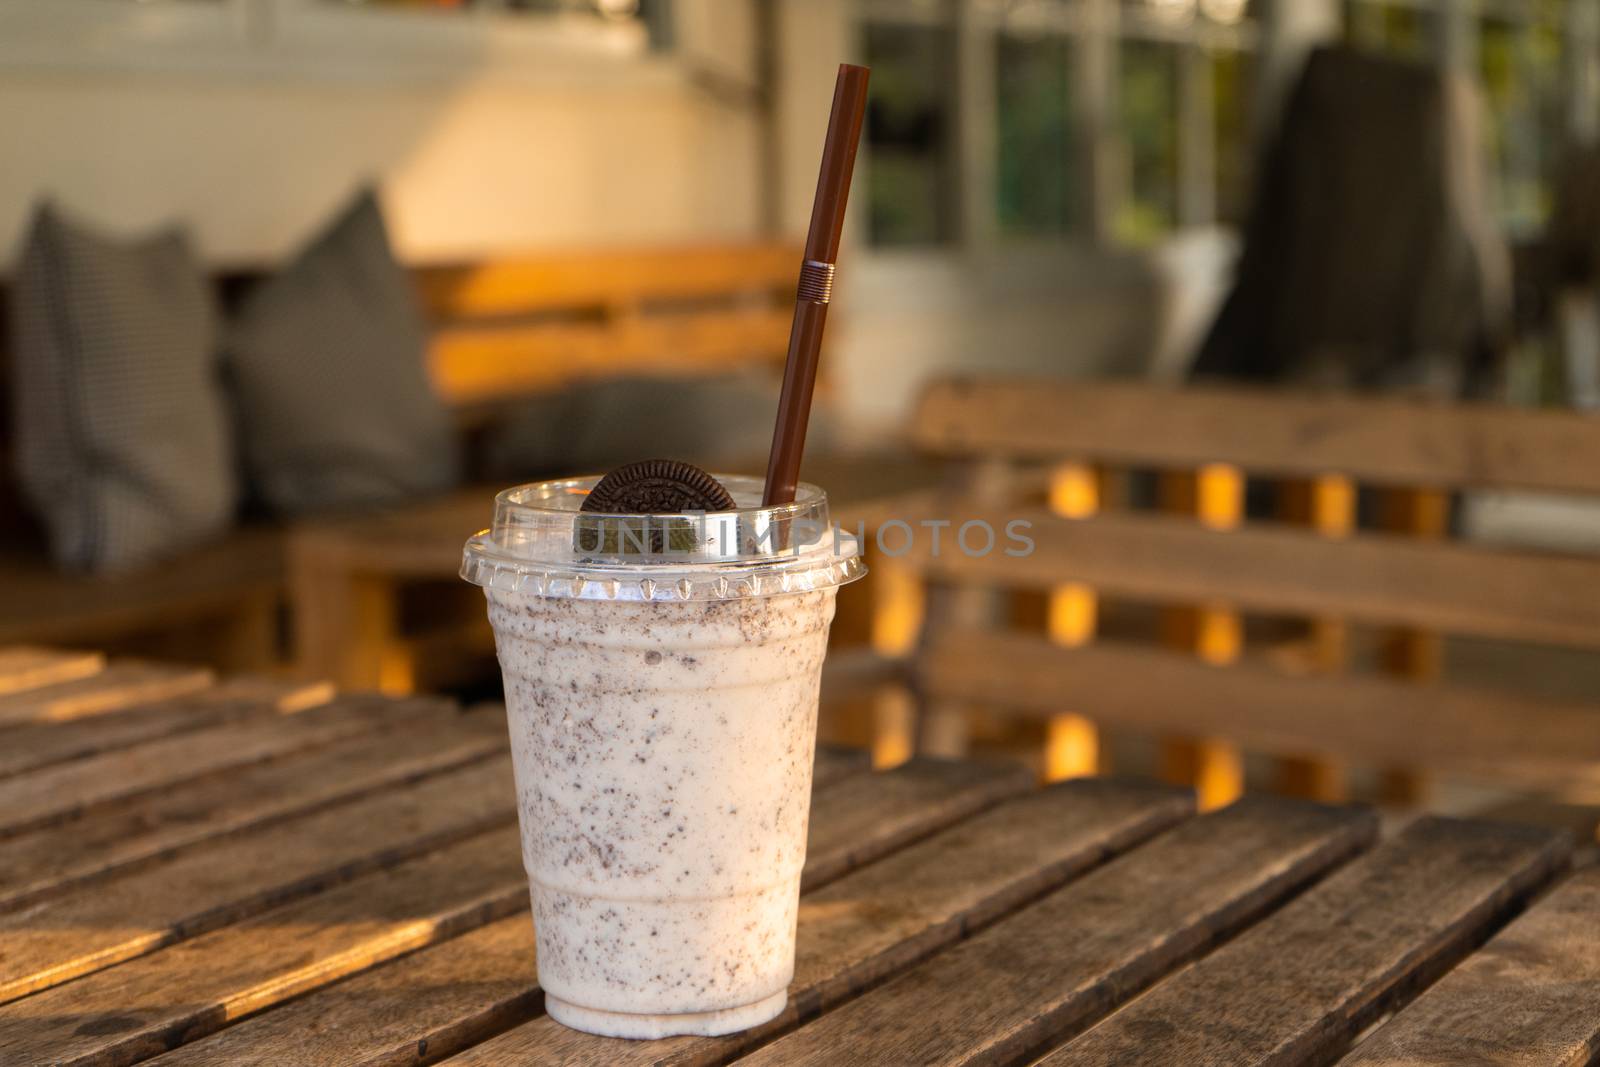 Milkshake with ice cream and cookies. Cool and refreshing on a hot day by Try_my_best